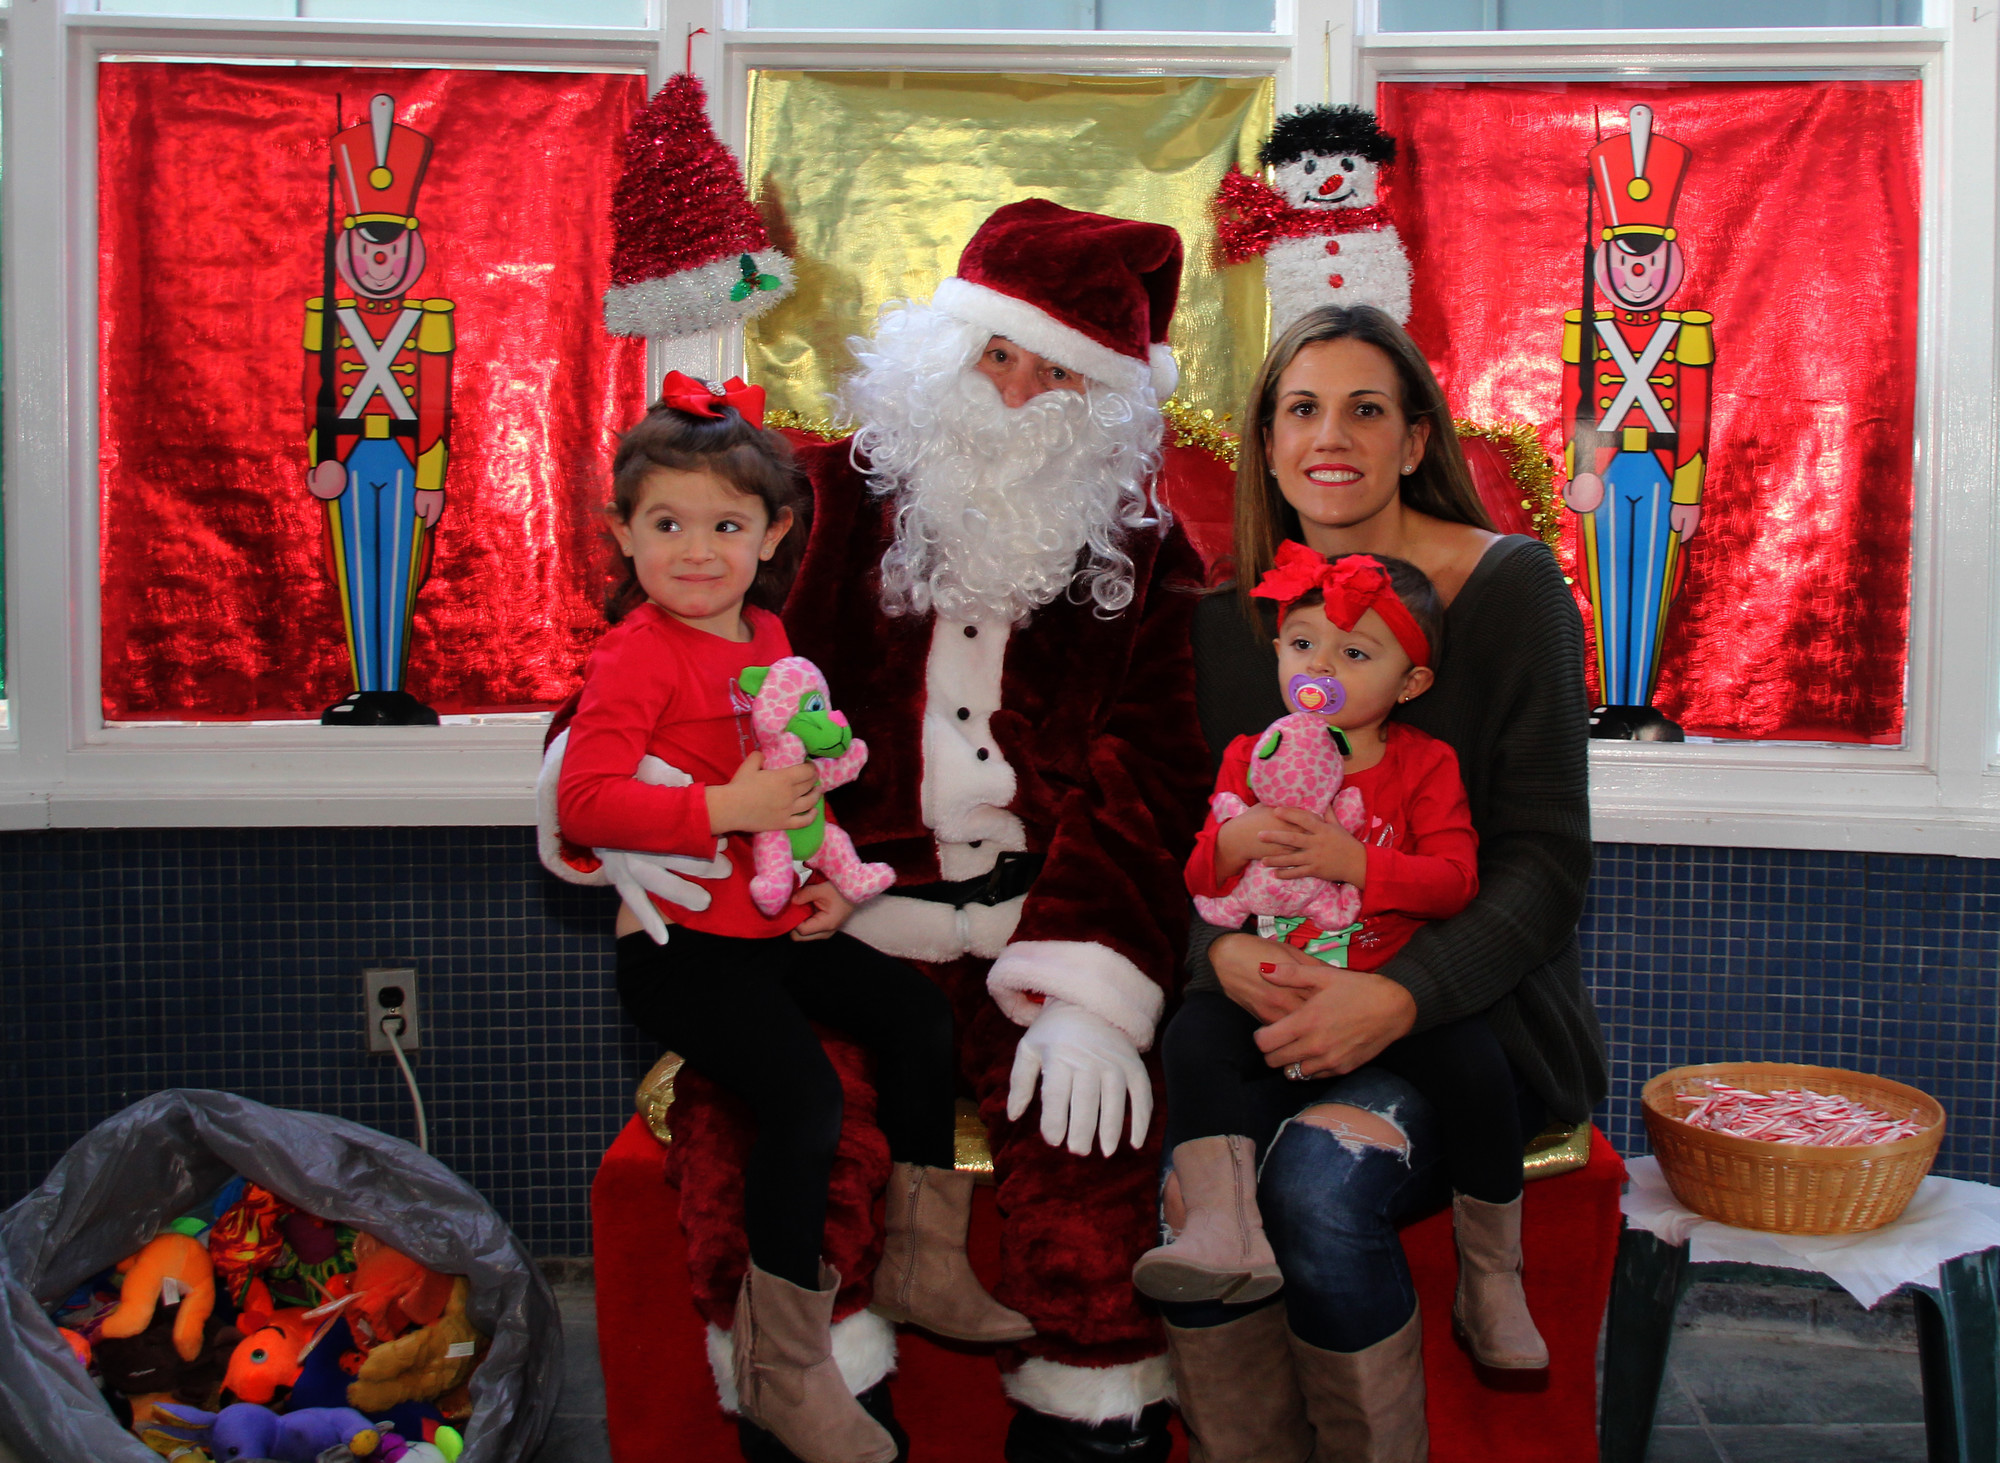 Paula Reid and her daughters, Victoria, 3, and Sienna, 19 months, stopped by Santa in the Park last Saturday.